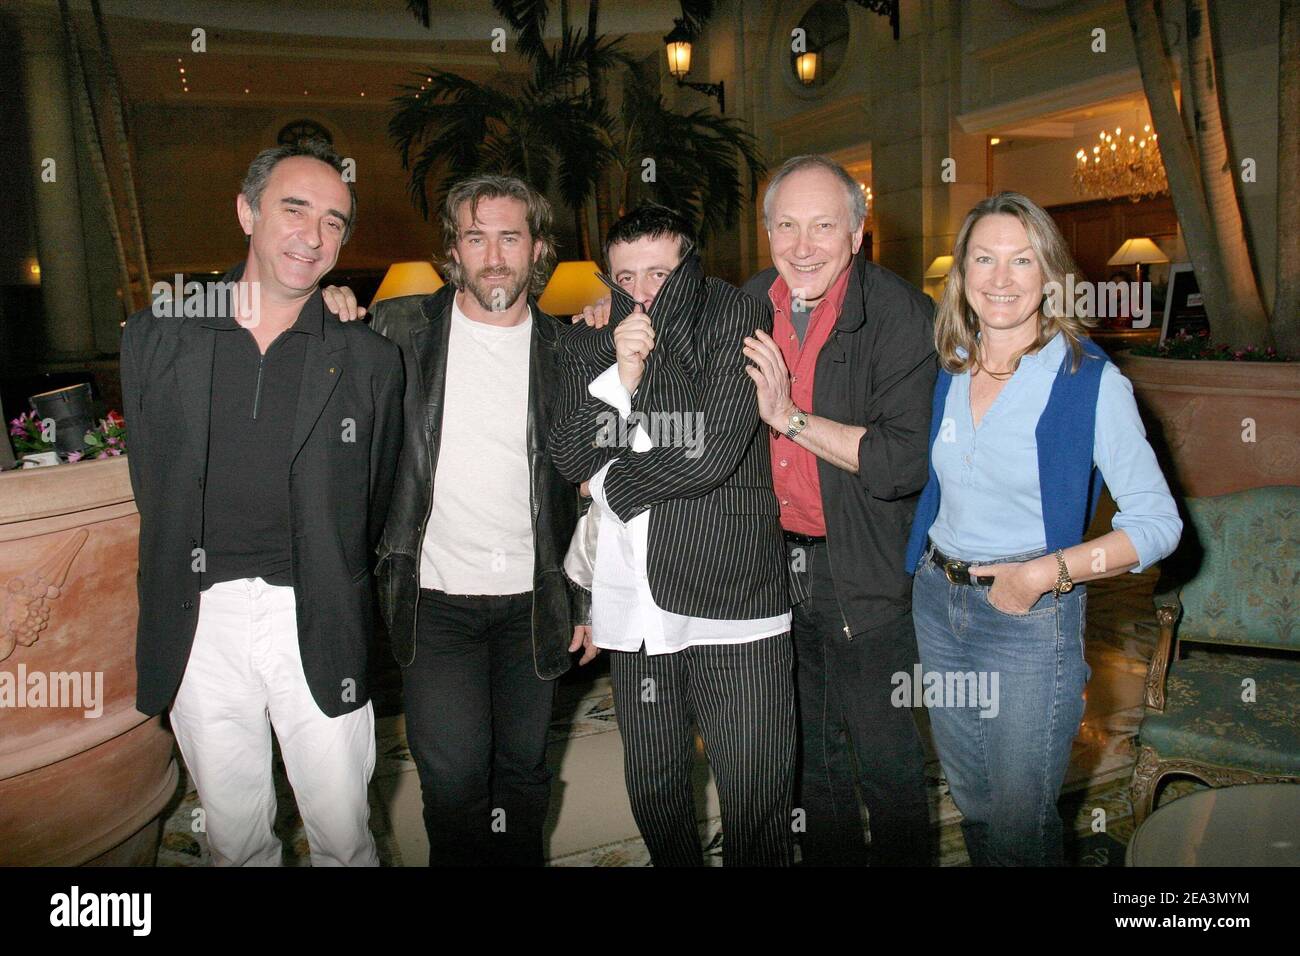 From L to R. French producer Fred De Fooko, Canadian actor Roy Dupuis, French actor Michel Muller, Canadian producer Chuck Smiley, English Producer Lynda Cope pose for there movie 'C'est pas moi !... c'est l'autre' at hotel Marriot in Paris, France on April 3, 2005. Photo by Benoit Pinguet/ABACA. Stock Photo